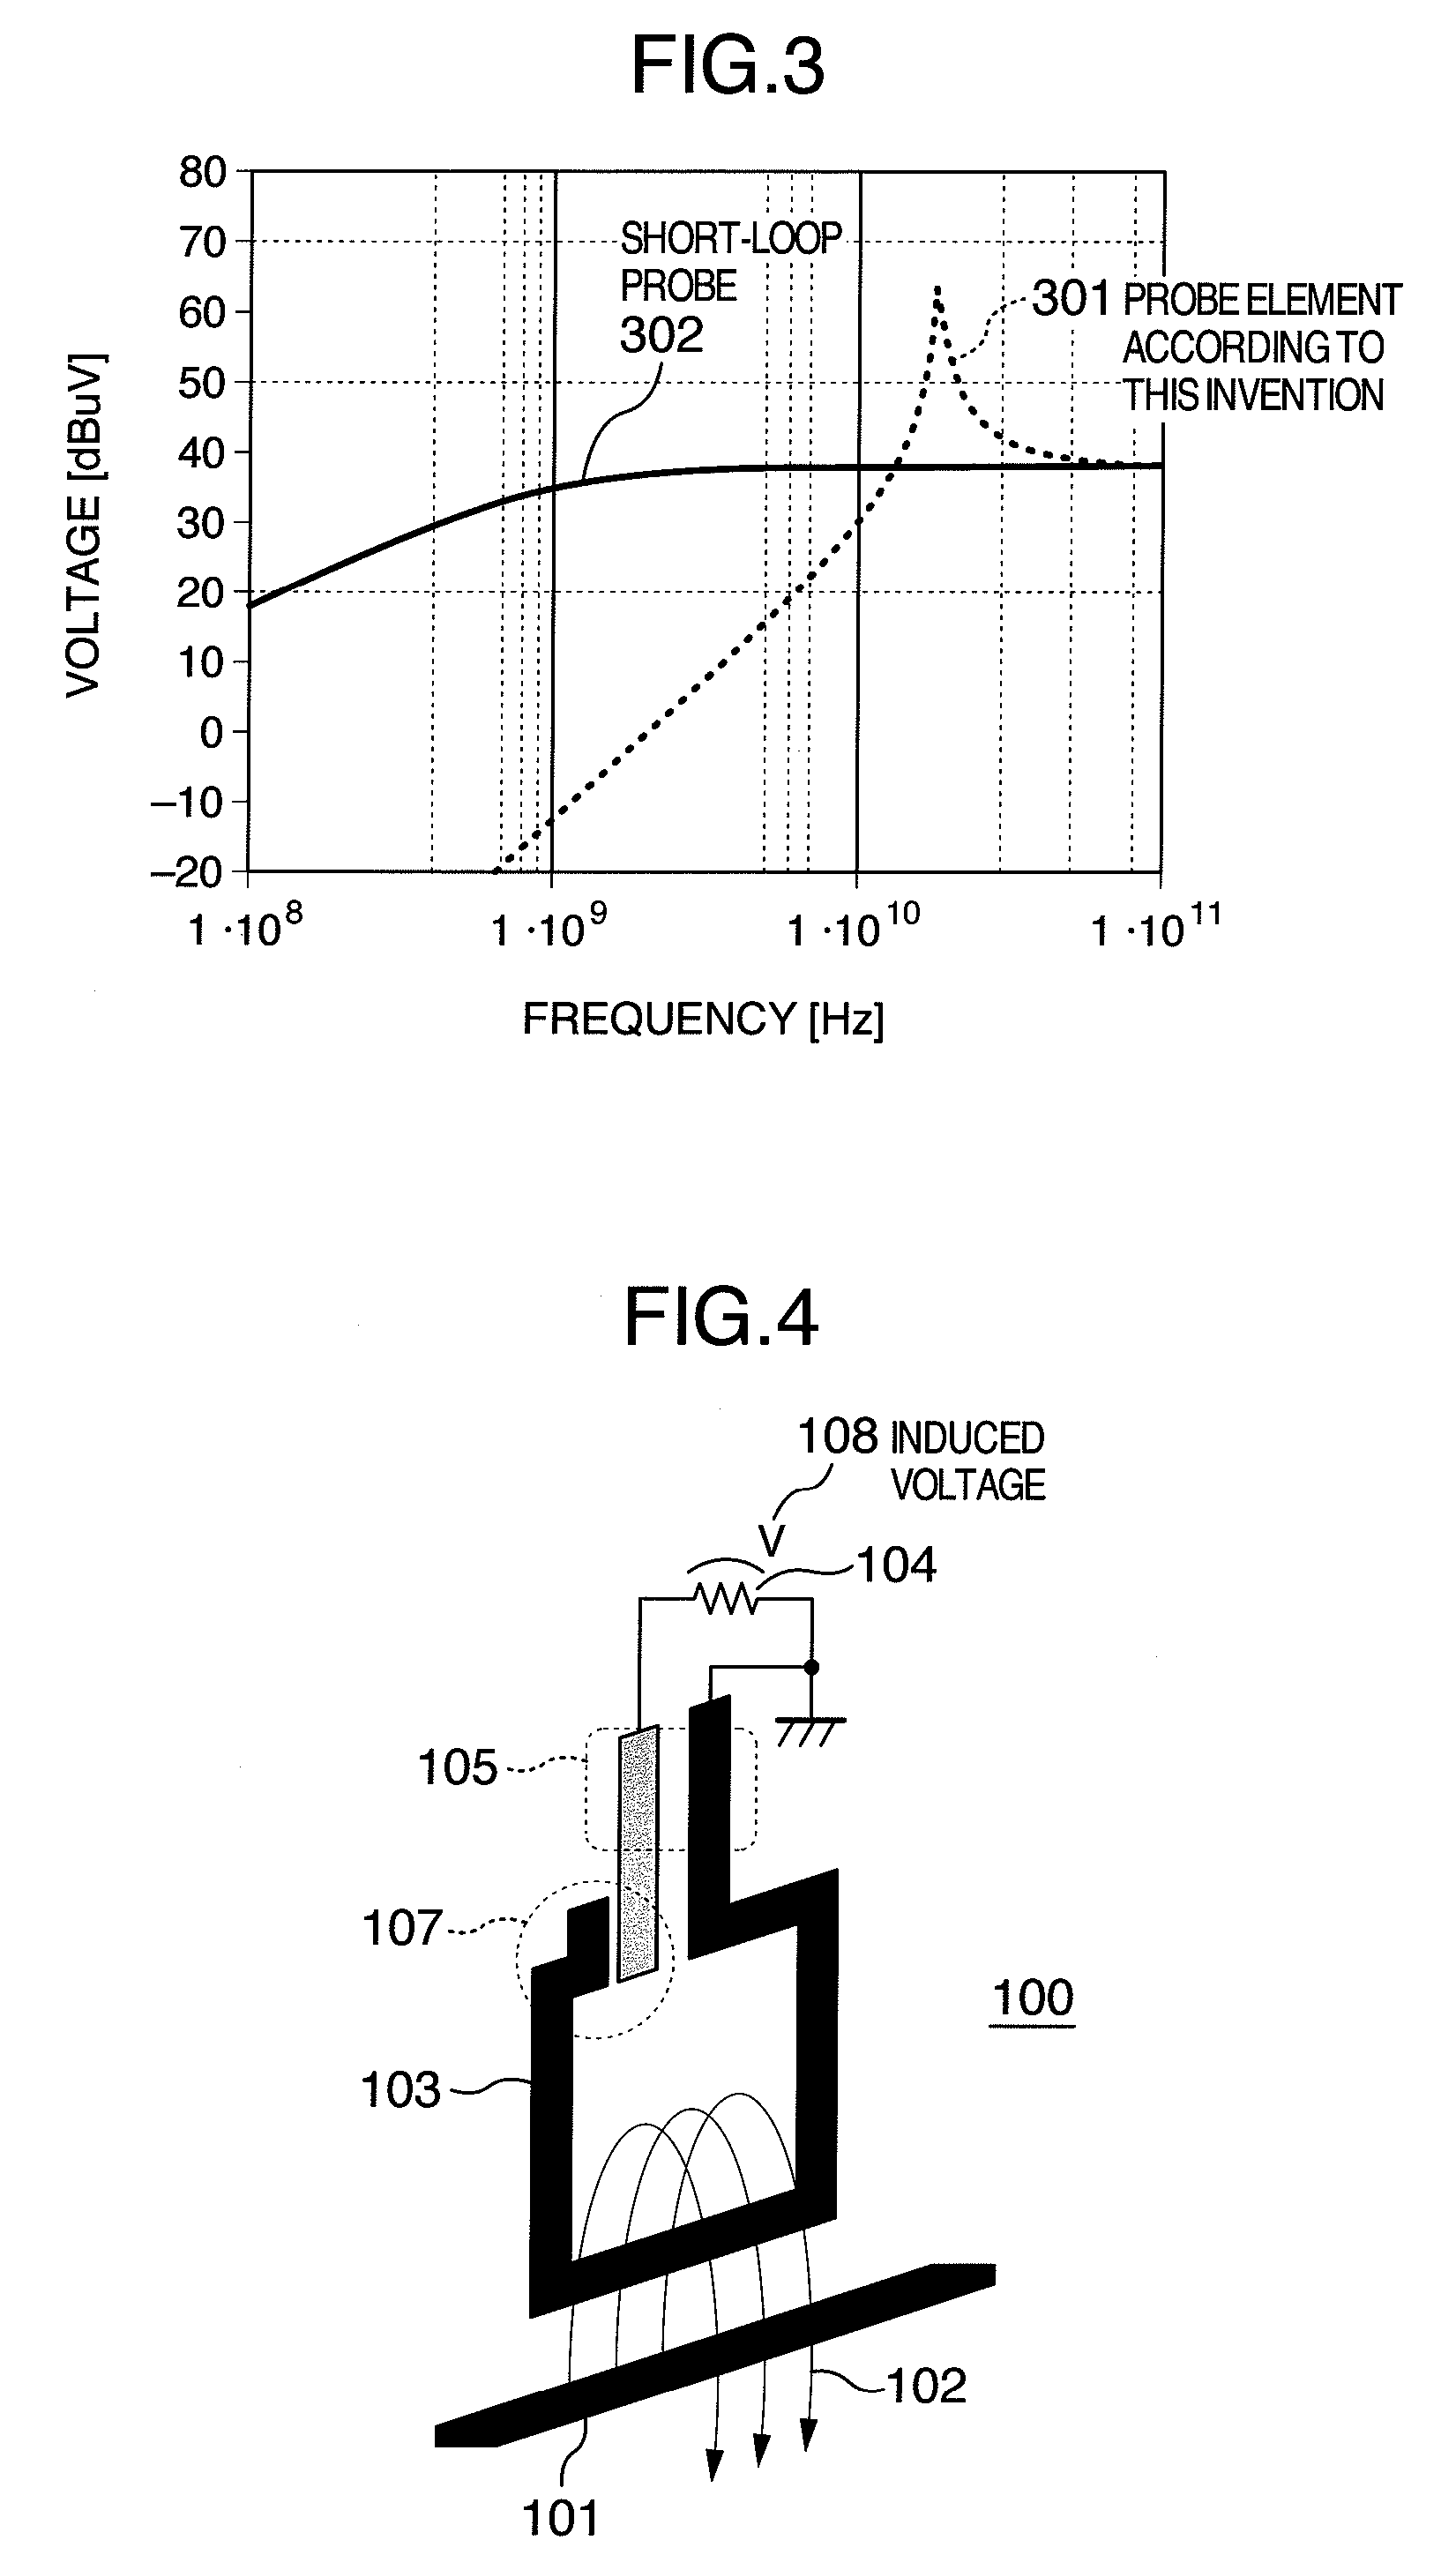 Magnetic field probe apparatus and a method for measuring magnetic field